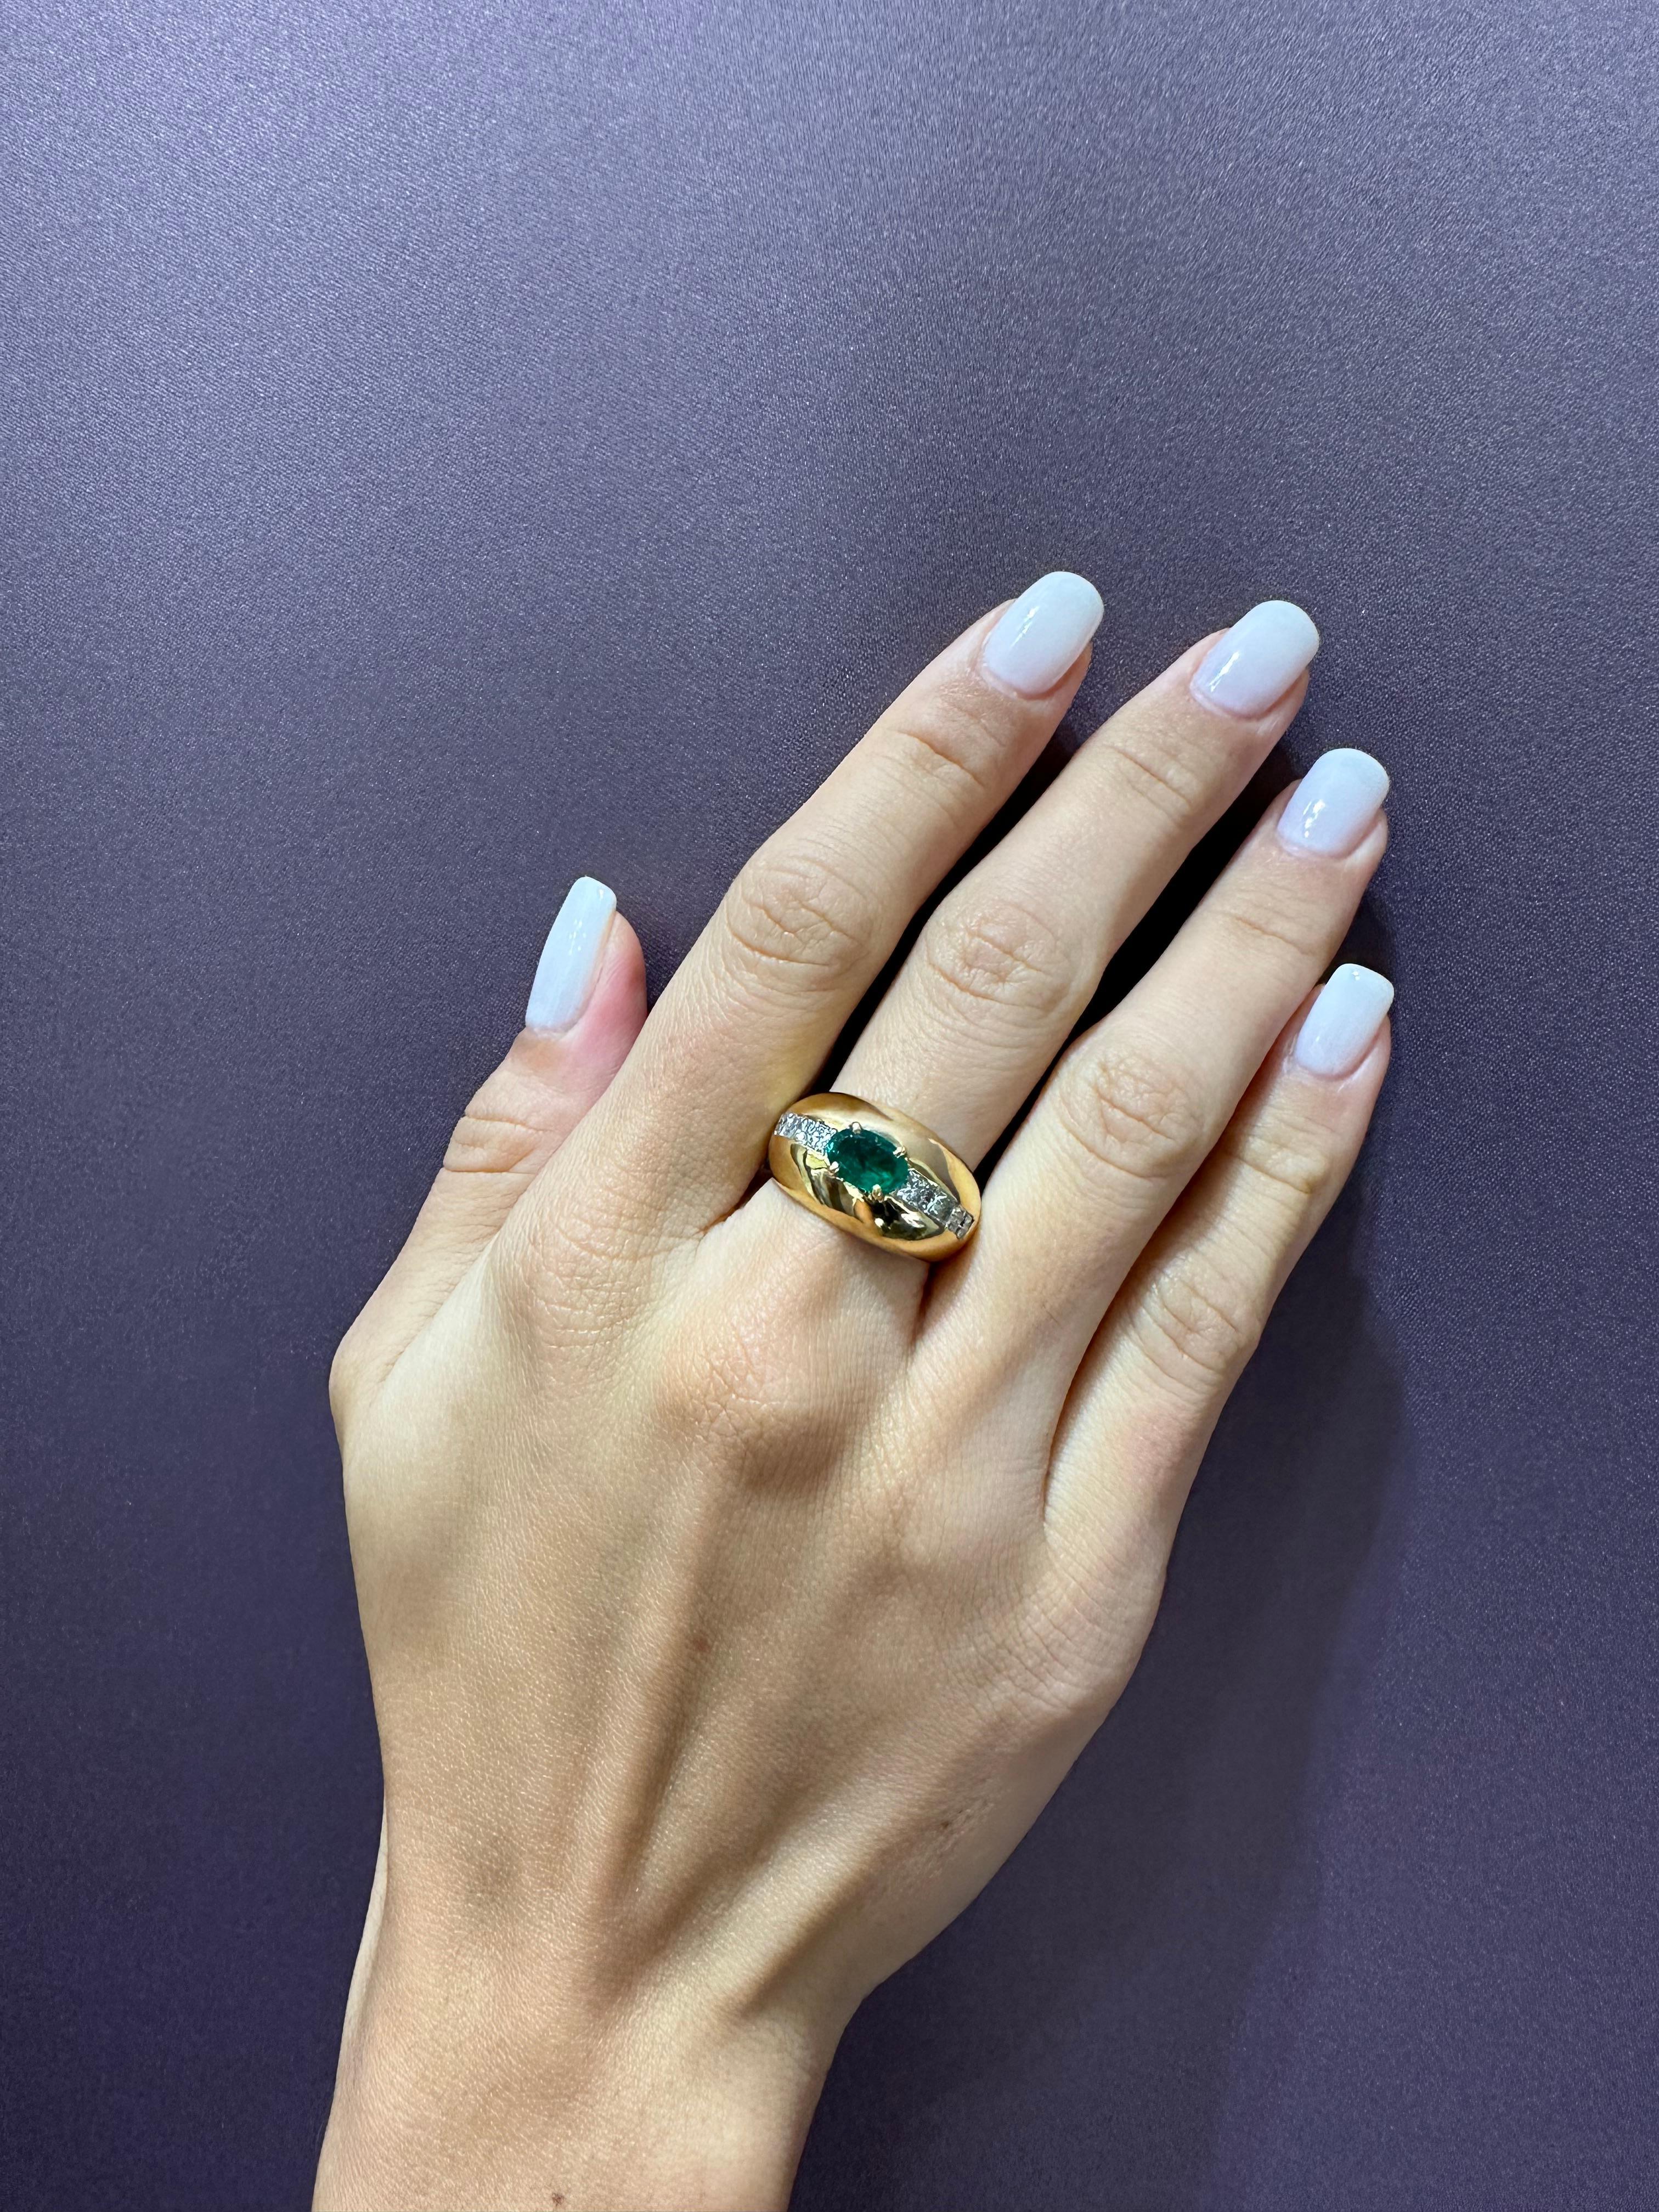 Rosior Contemporary Cocktail Ring set in Yellow Gold with:
- 1 Oval Cut Emerald weighing 0,73 ct;
- 8 Princess Cut Diamonds weighing 1,12 ct.
Weight in 19.2K gold: 8.5 g.
Handmade in Portugal.
Stamped by the portuguese assay office as 19.2K